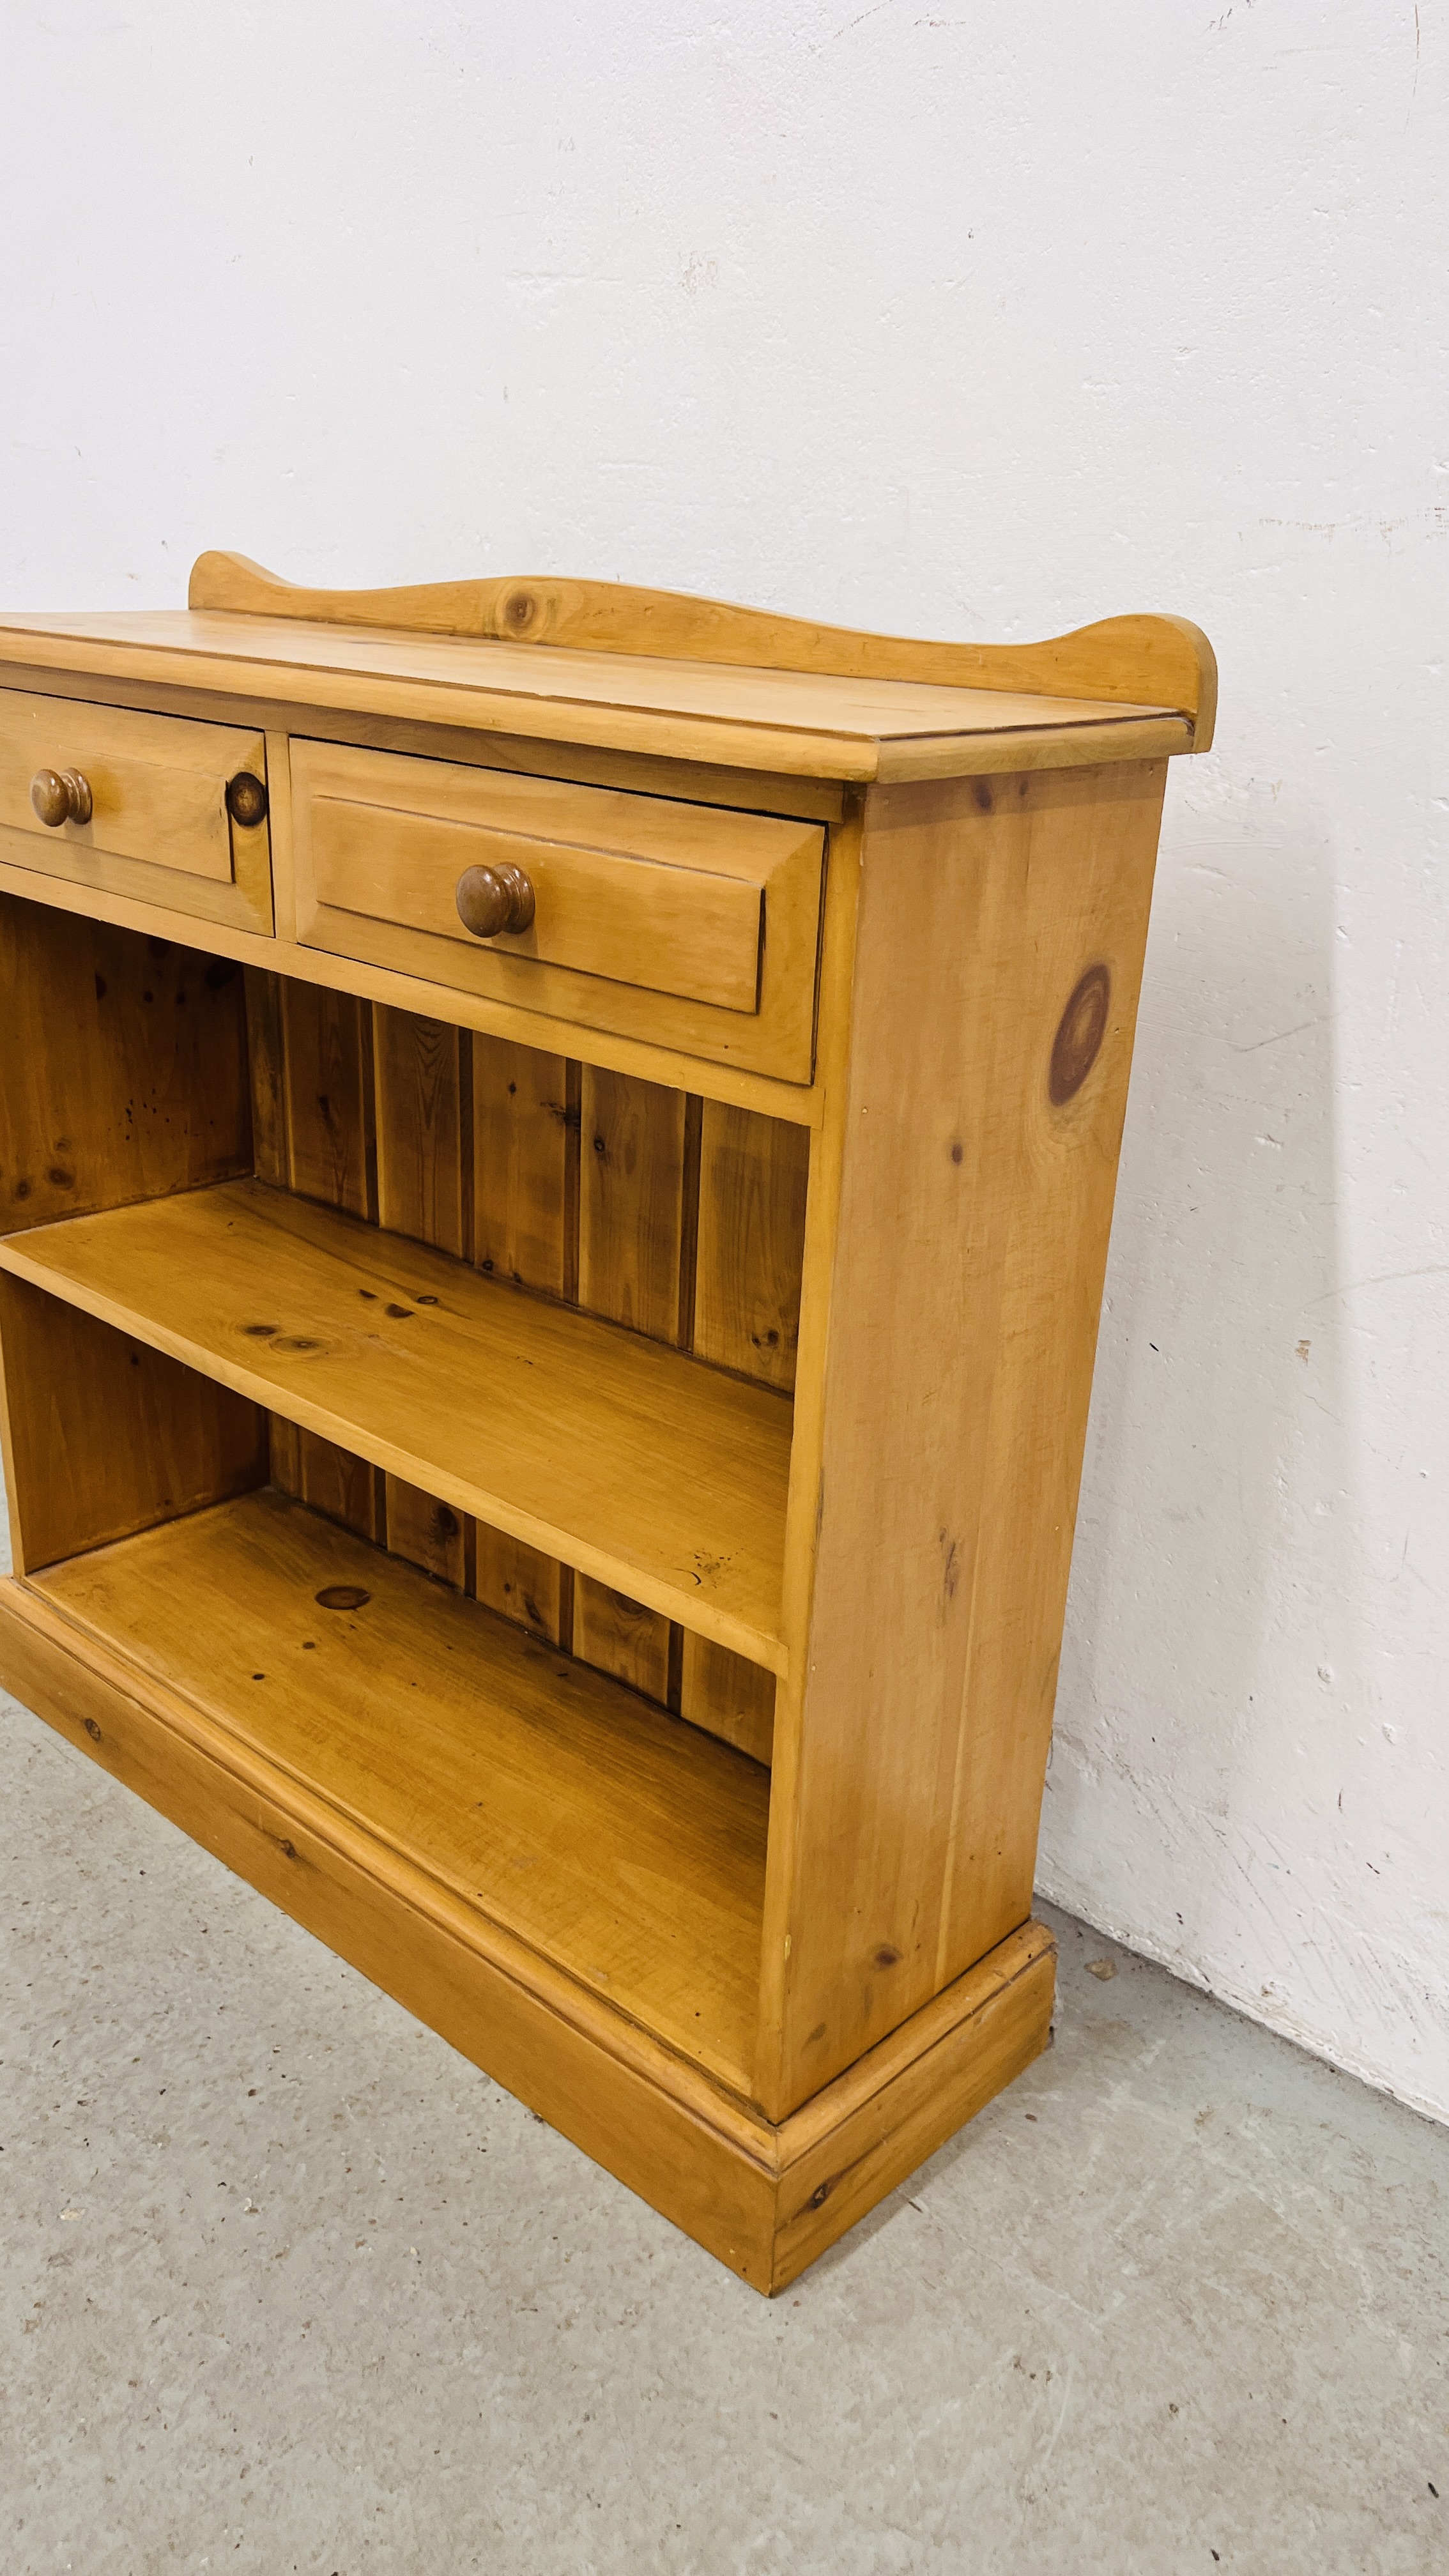 A WAXED PINE TWO TIER BOOKSHELF WITH DRAWERS, W 87CM, D 27CM, H 88CM. - Image 4 of 8